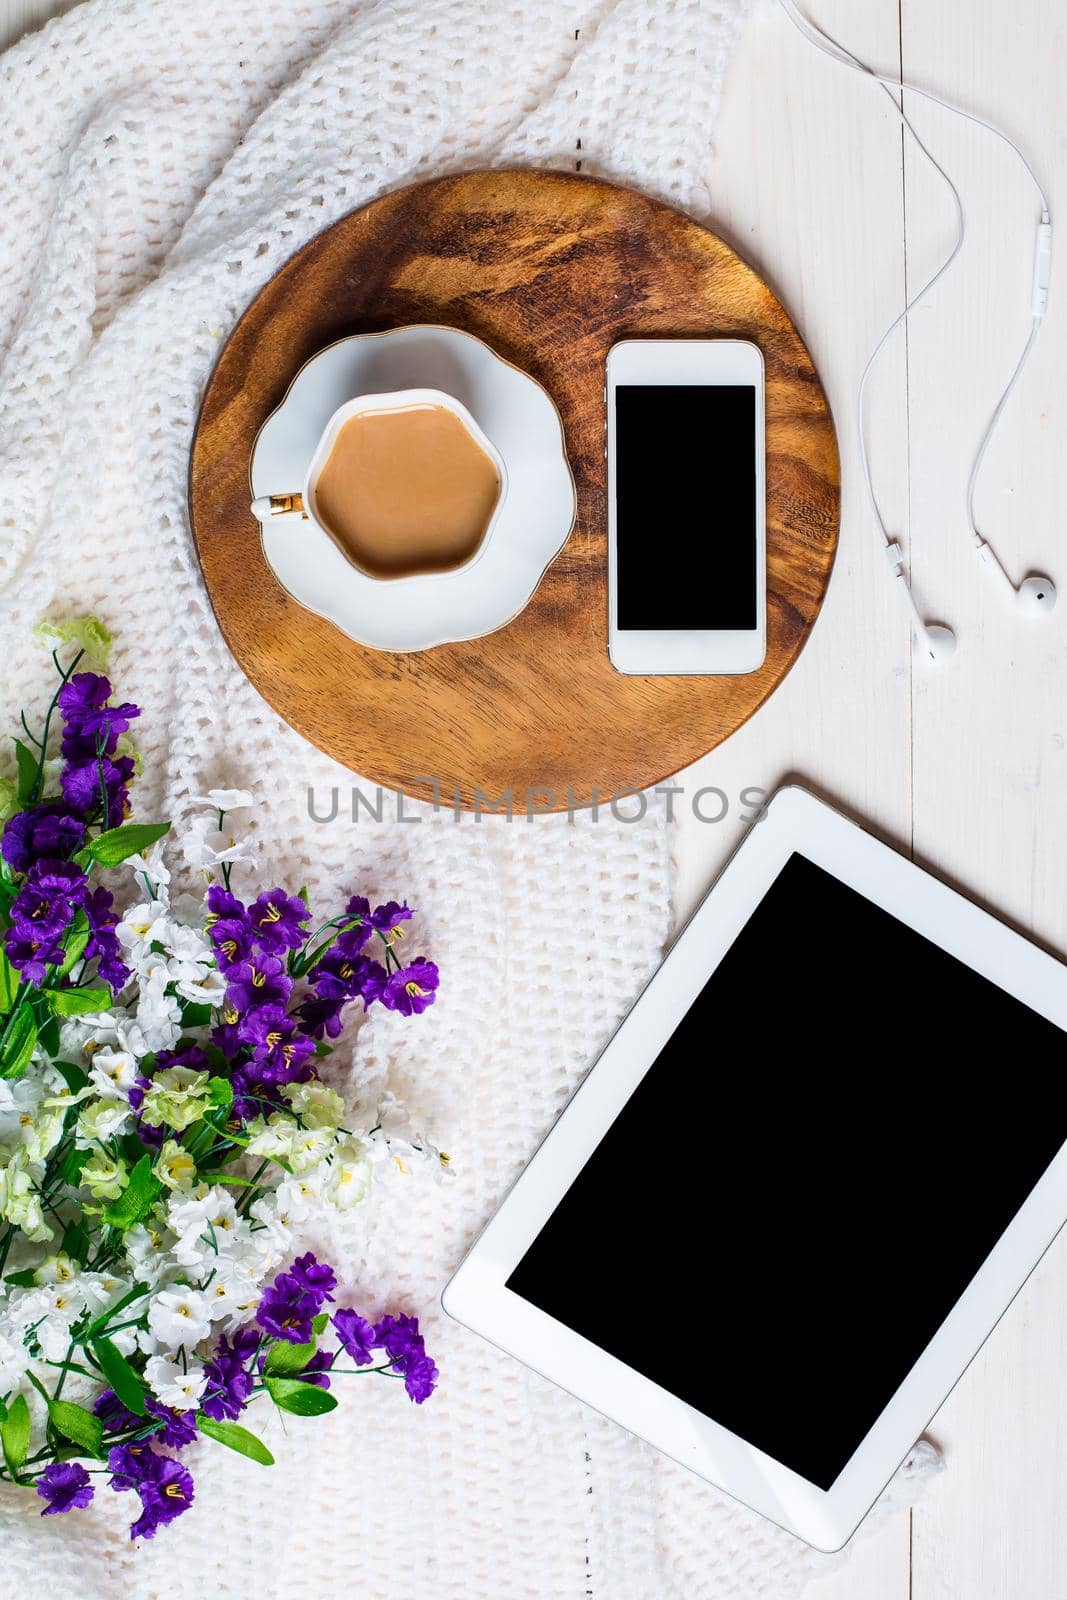 Flat lay, top view, mock up women's accessories on a white background. phone, tablet, a cup of coffee